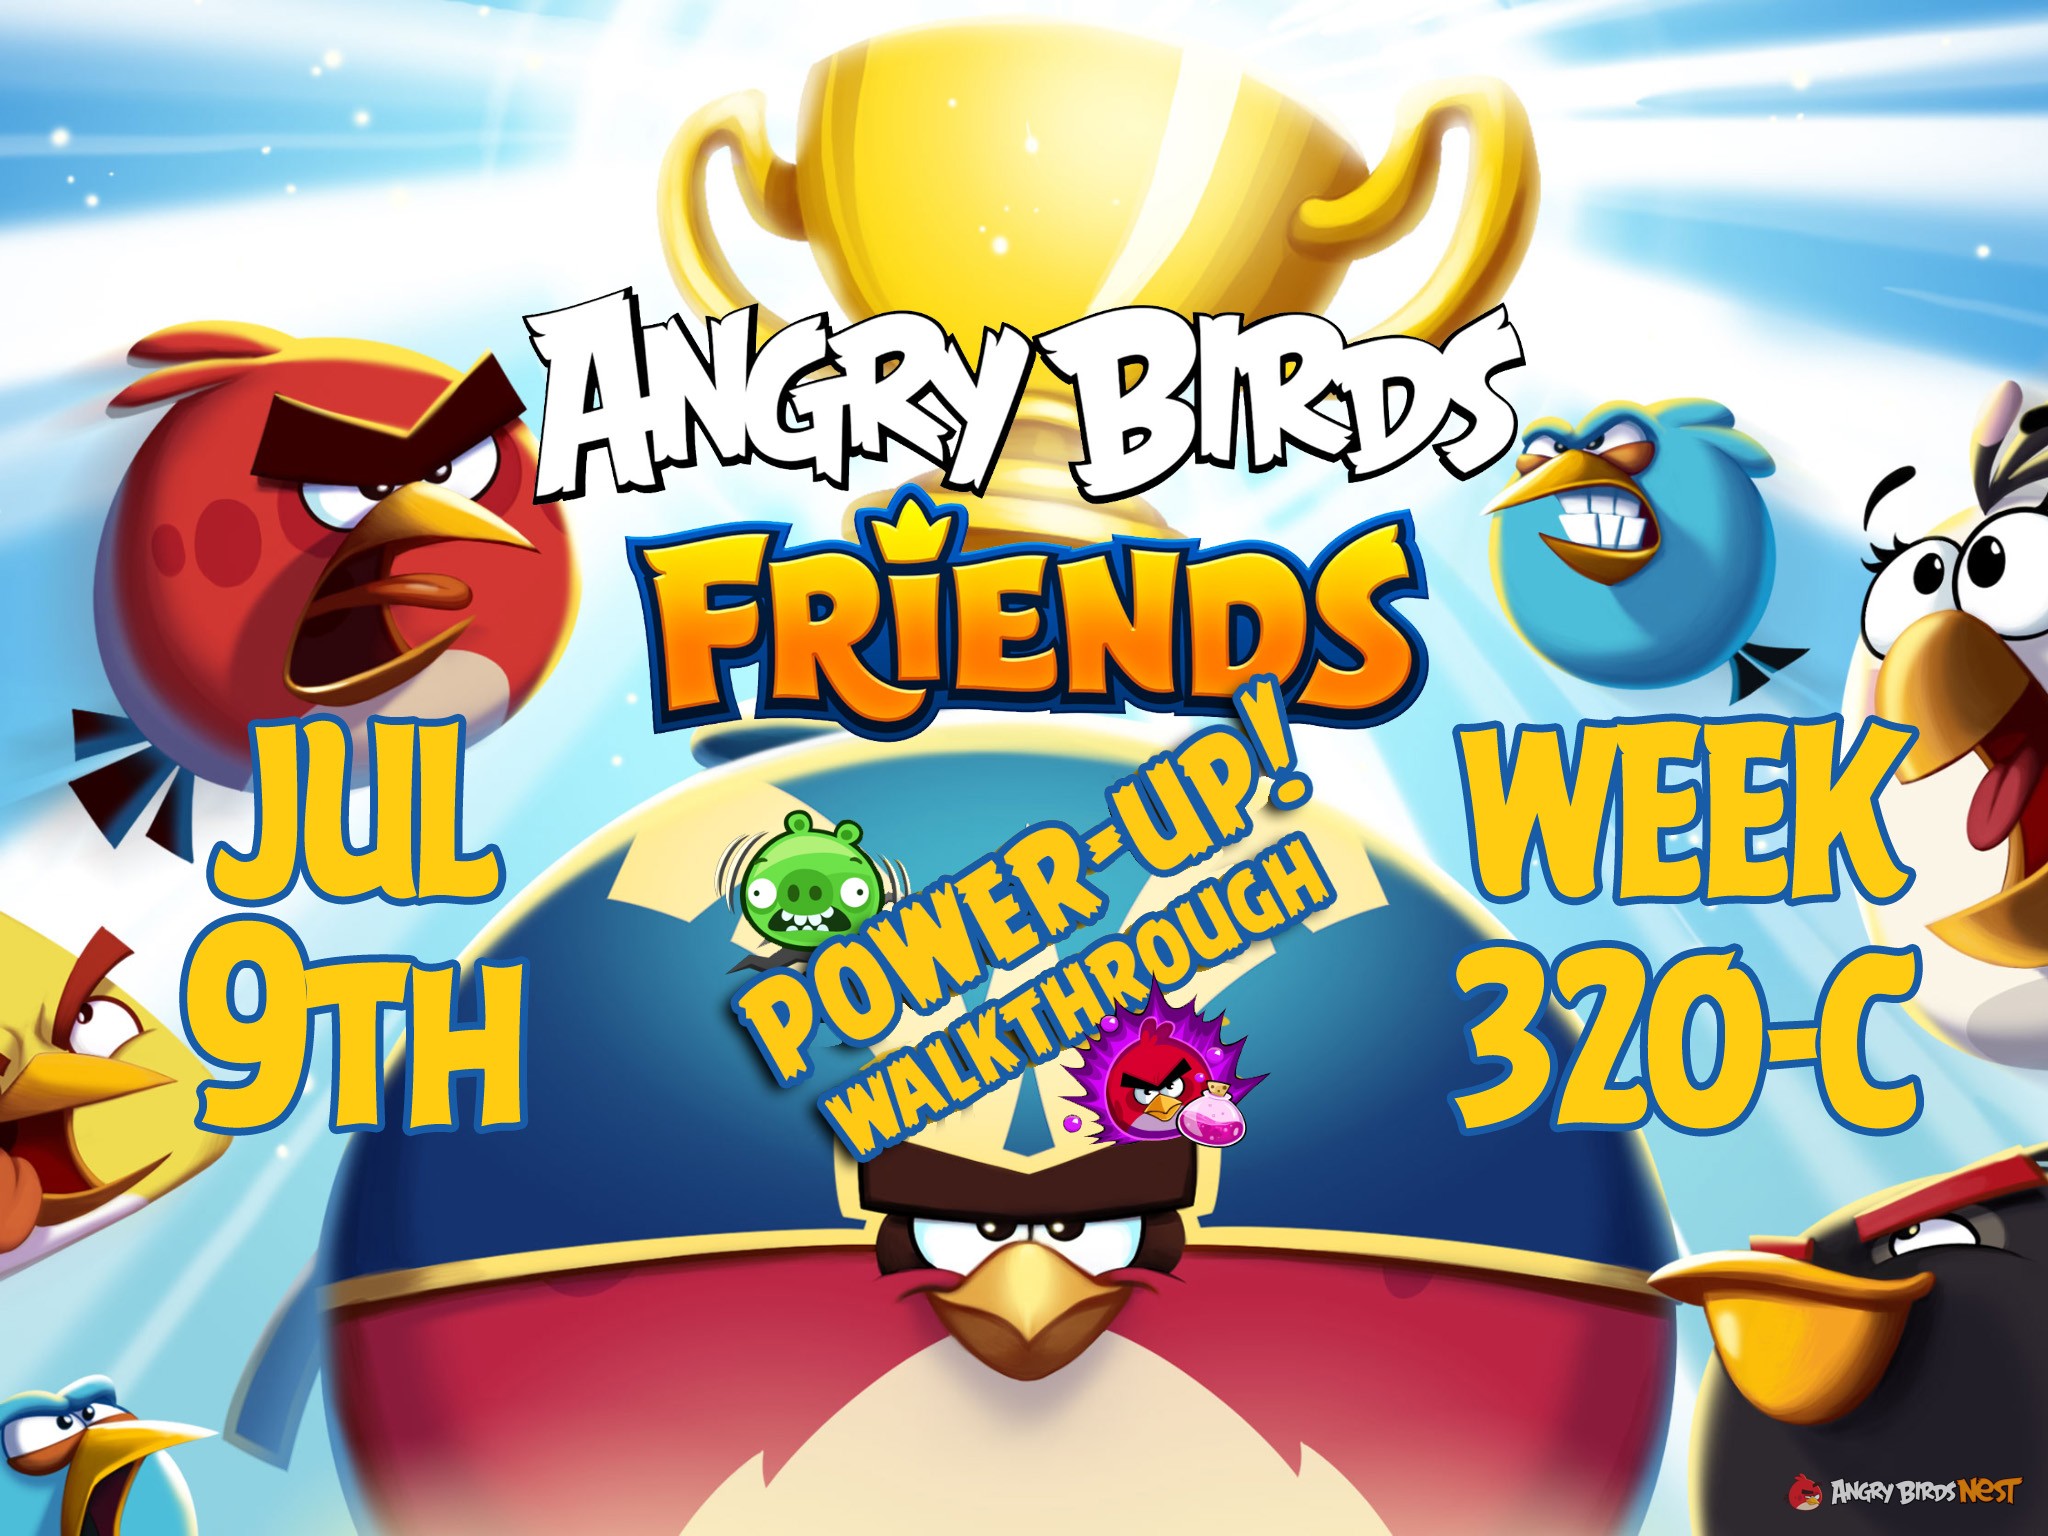 Angry-Birds-Friends-Tournament-Week-320-C-Feature-Image-PU